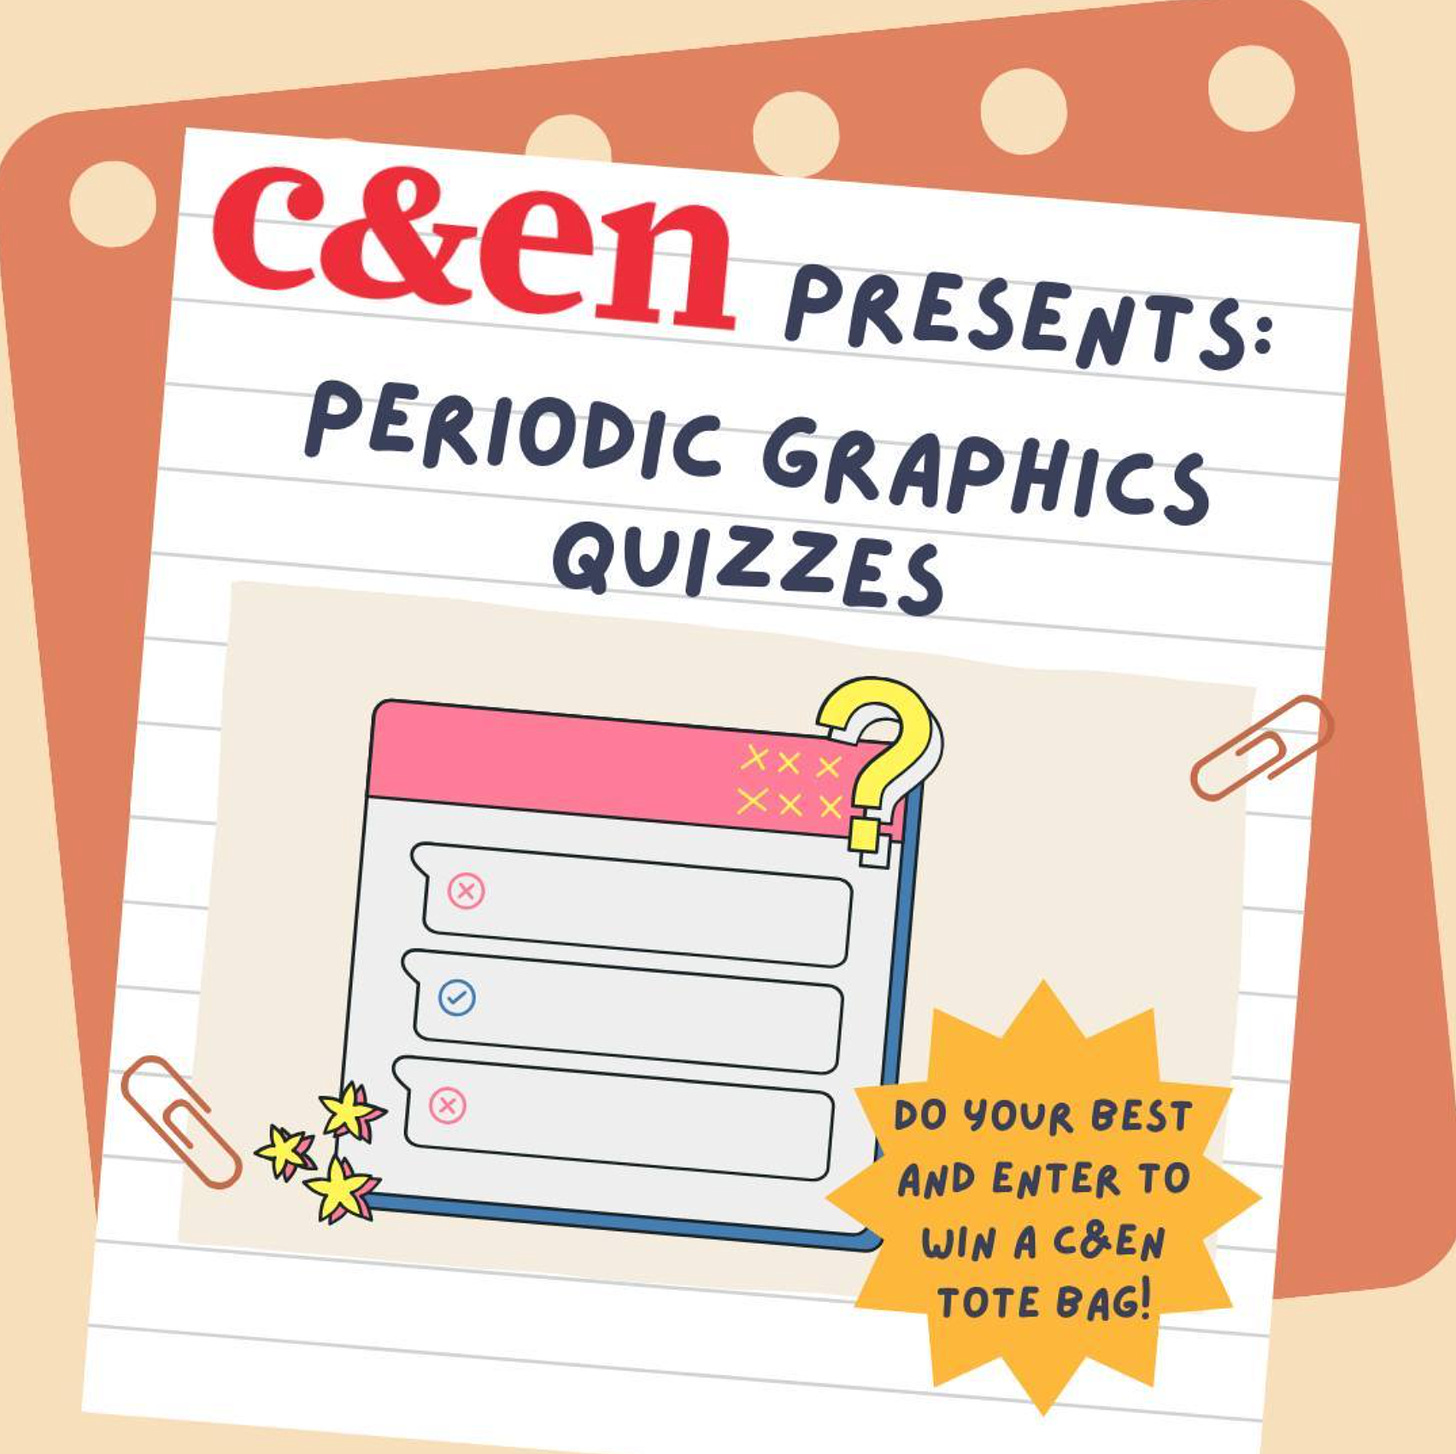 Image showing a calendar and the text "C&EN presents periodic graphics quizzes - do your best and enter to win a C&EN tote bag"